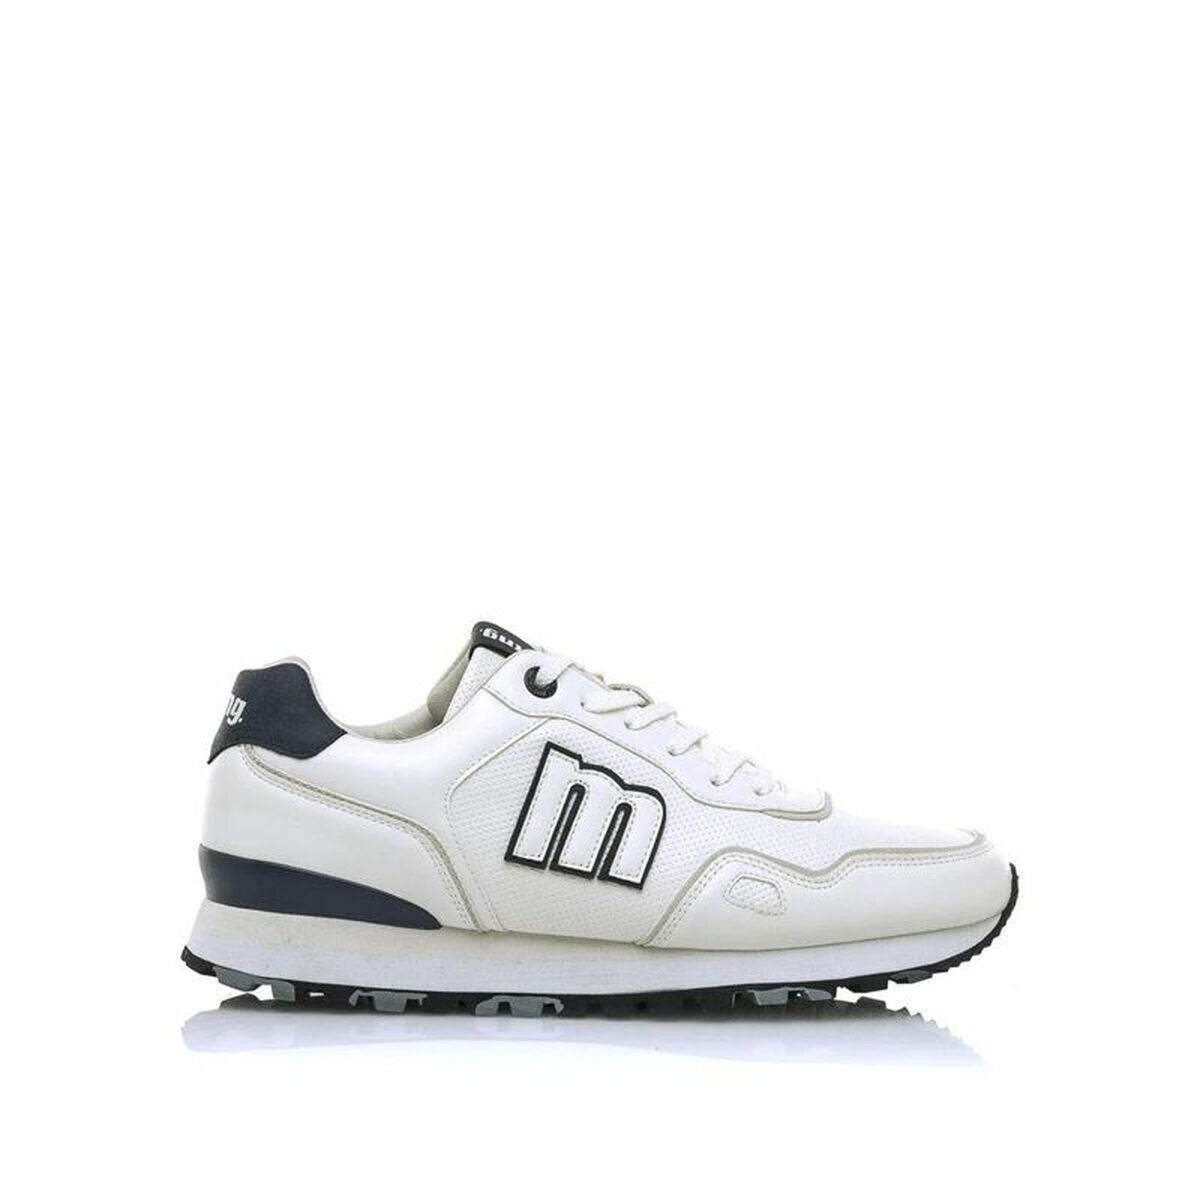 Chaussures casual homme Mustang Attitude Quart Blanc